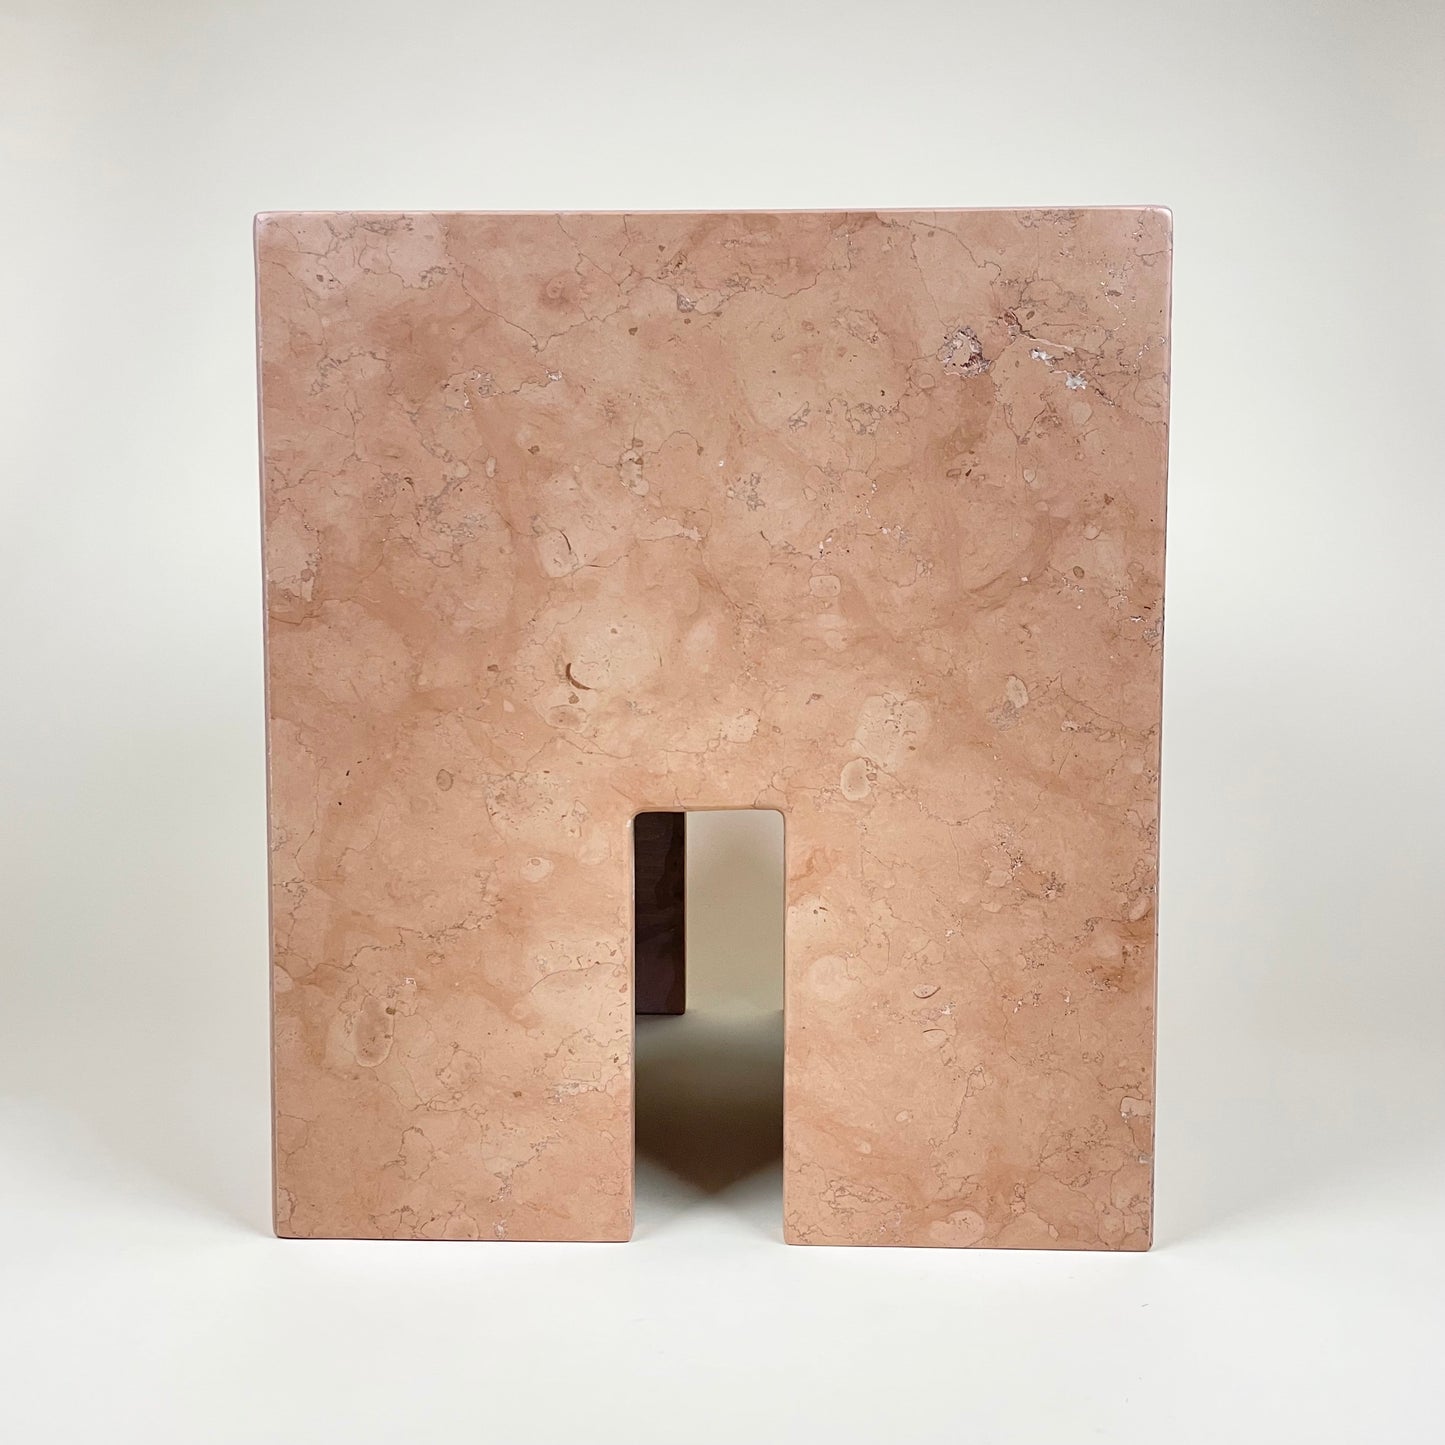 Marble side table by Public Studio